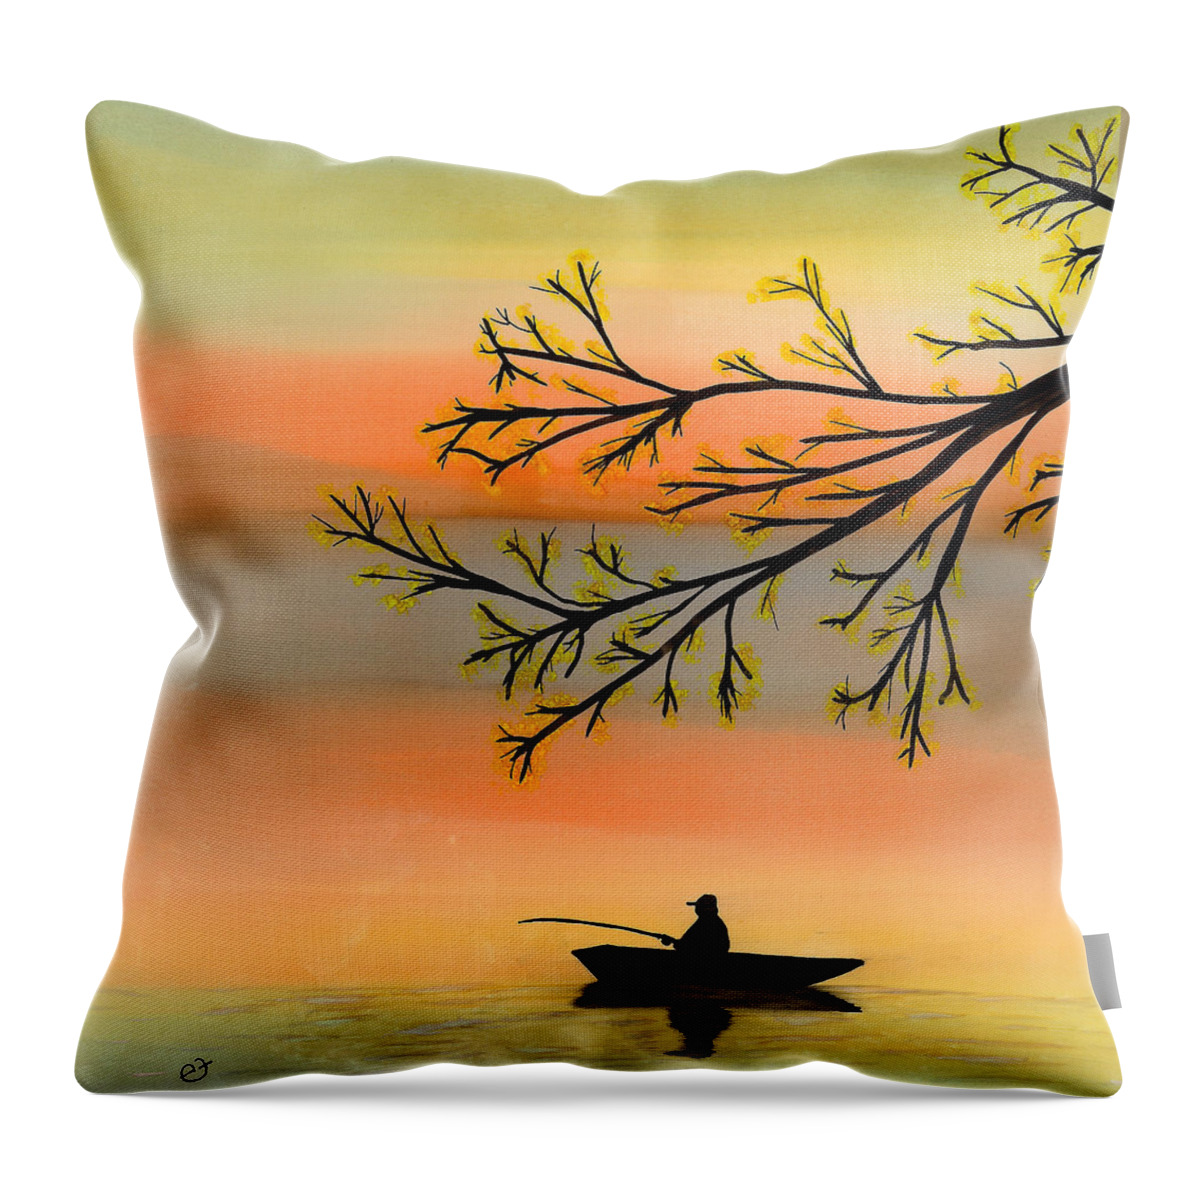 Fisherman Throw Pillow featuring the painting Seeking Solitude by Eli Tynan